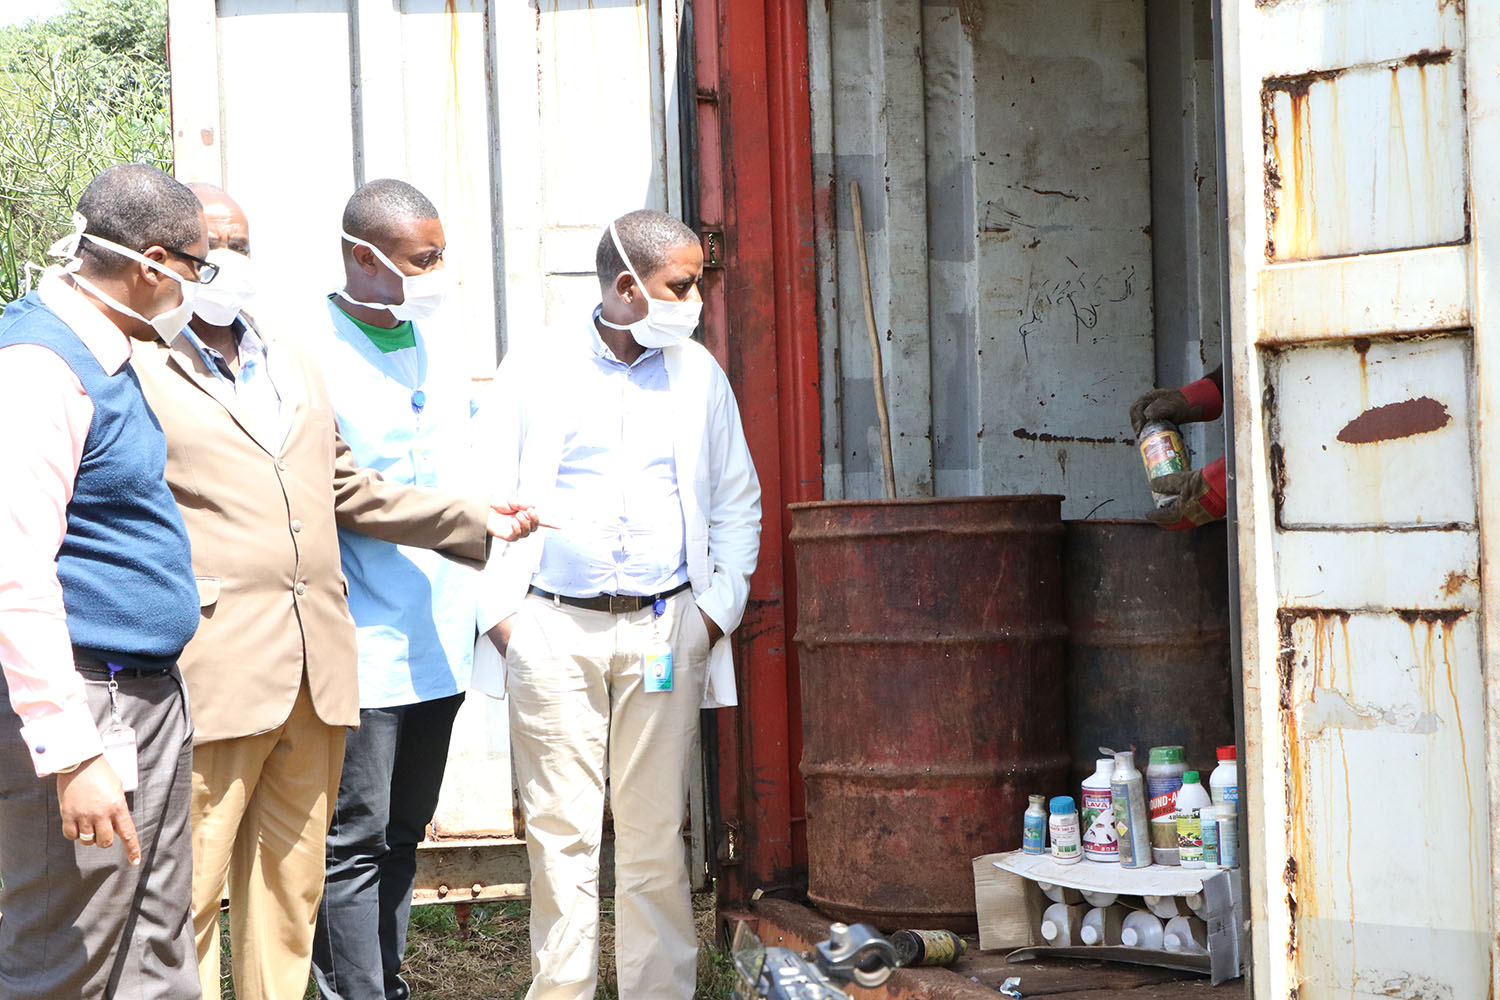 Officials look at the obsolete pesticides in the container. Jean de Dieu Nsabimana . 